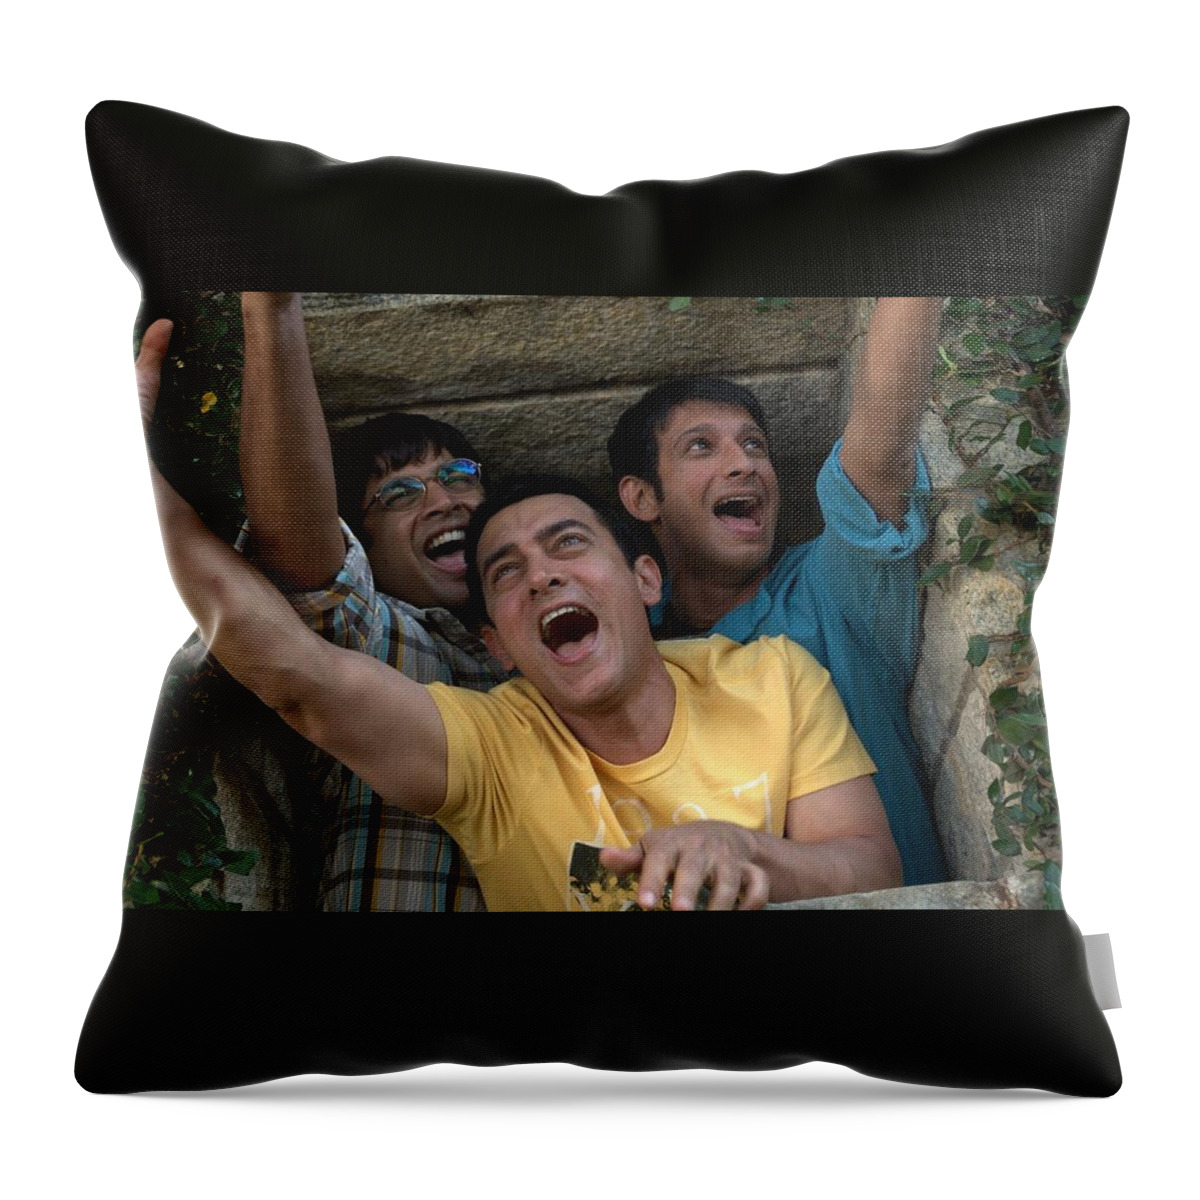 3 Idiots Throw Pillow featuring the digital art 3 Idiots by Maye Loeser